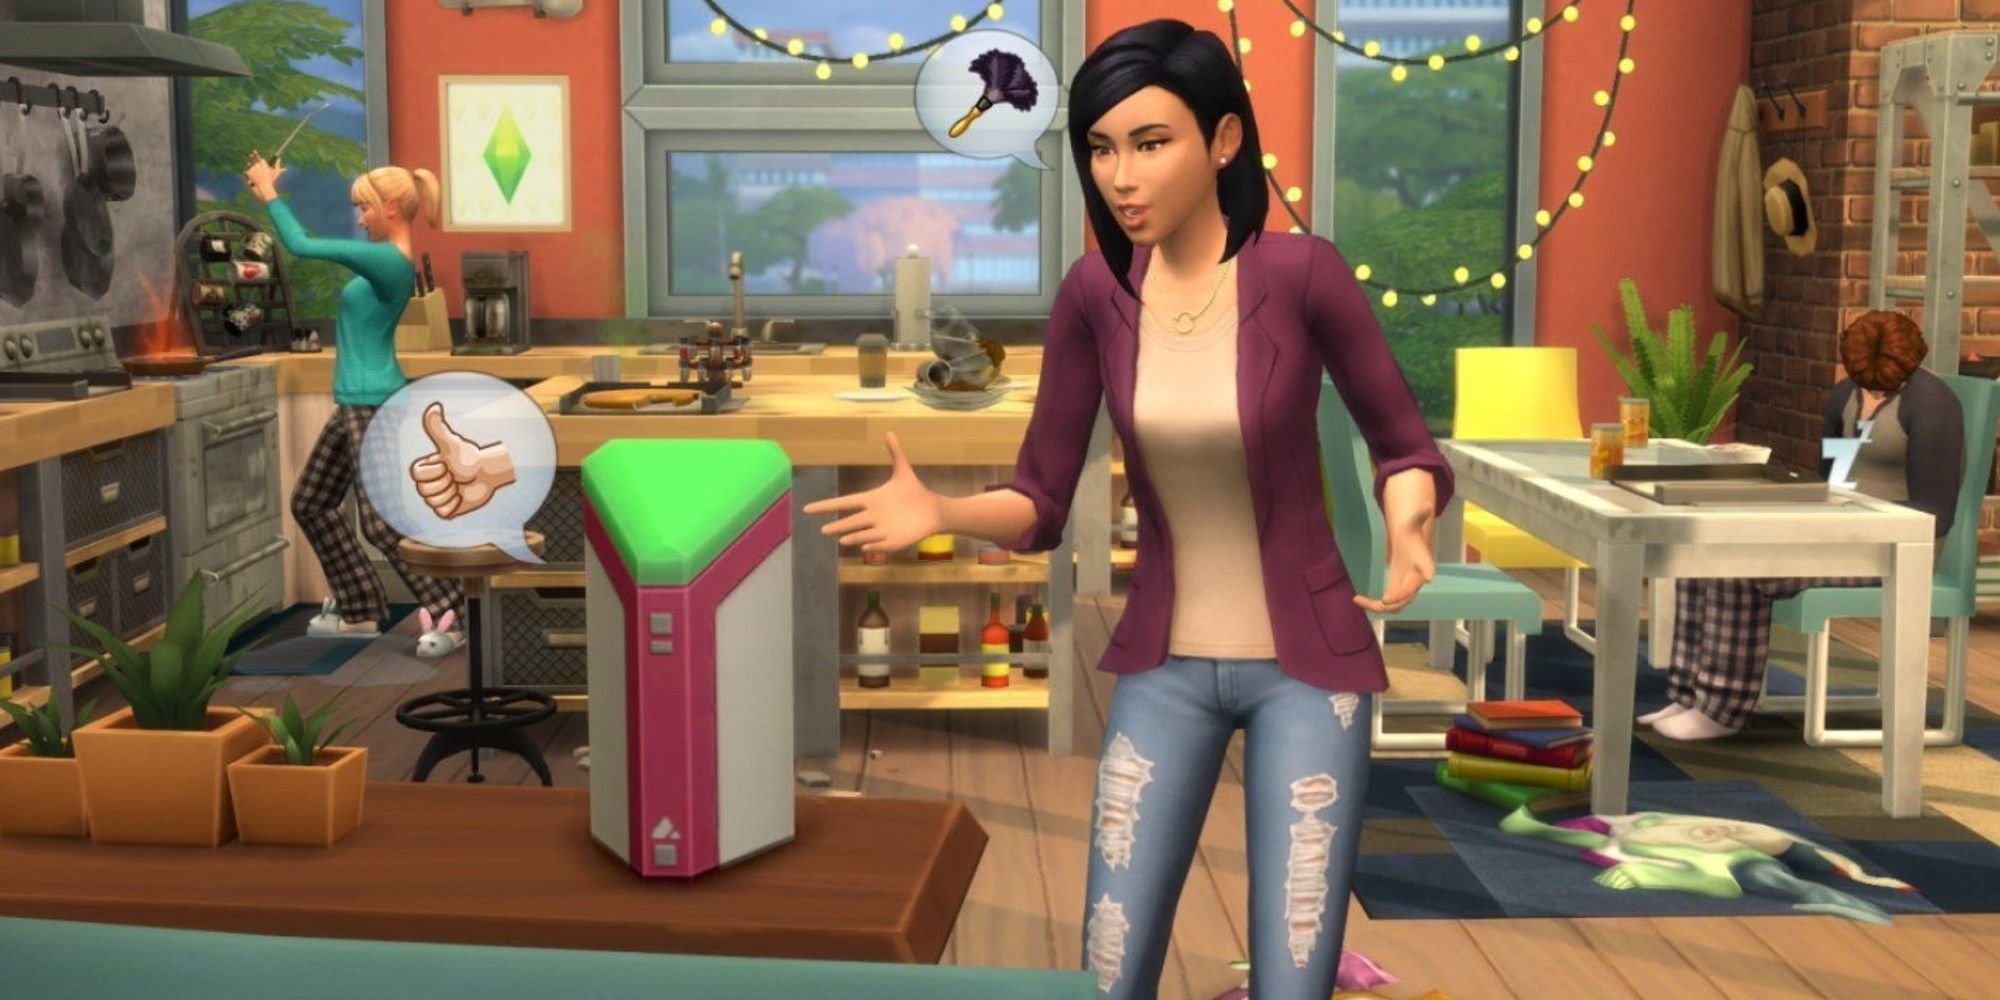 How Much It Costs To Buy All The Sims 4 Game Packs